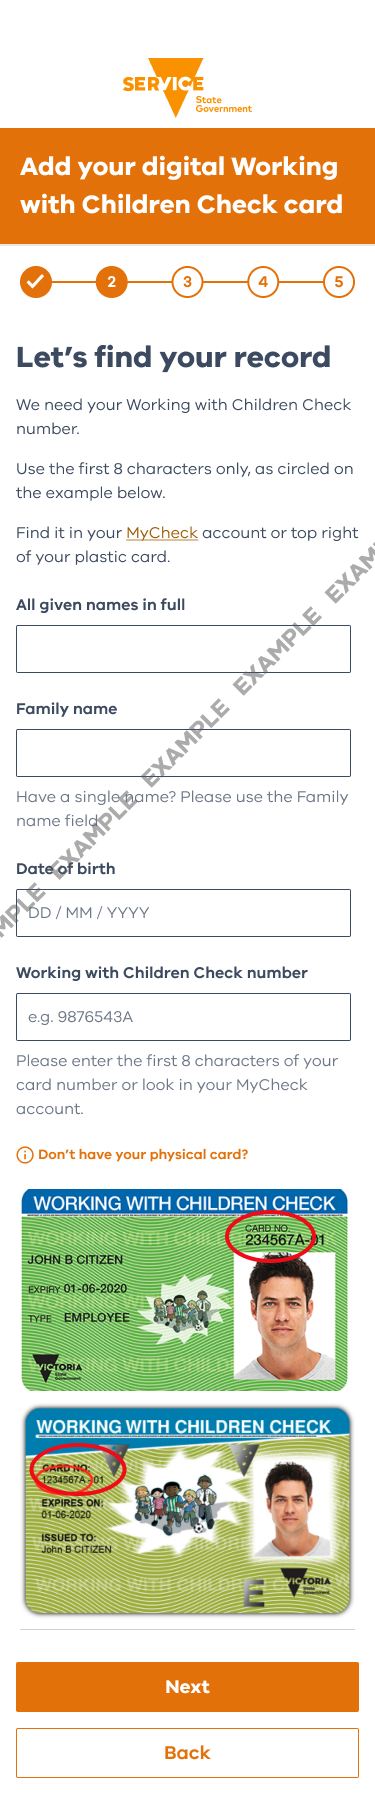 Personal Details for Working with Children Digital Card